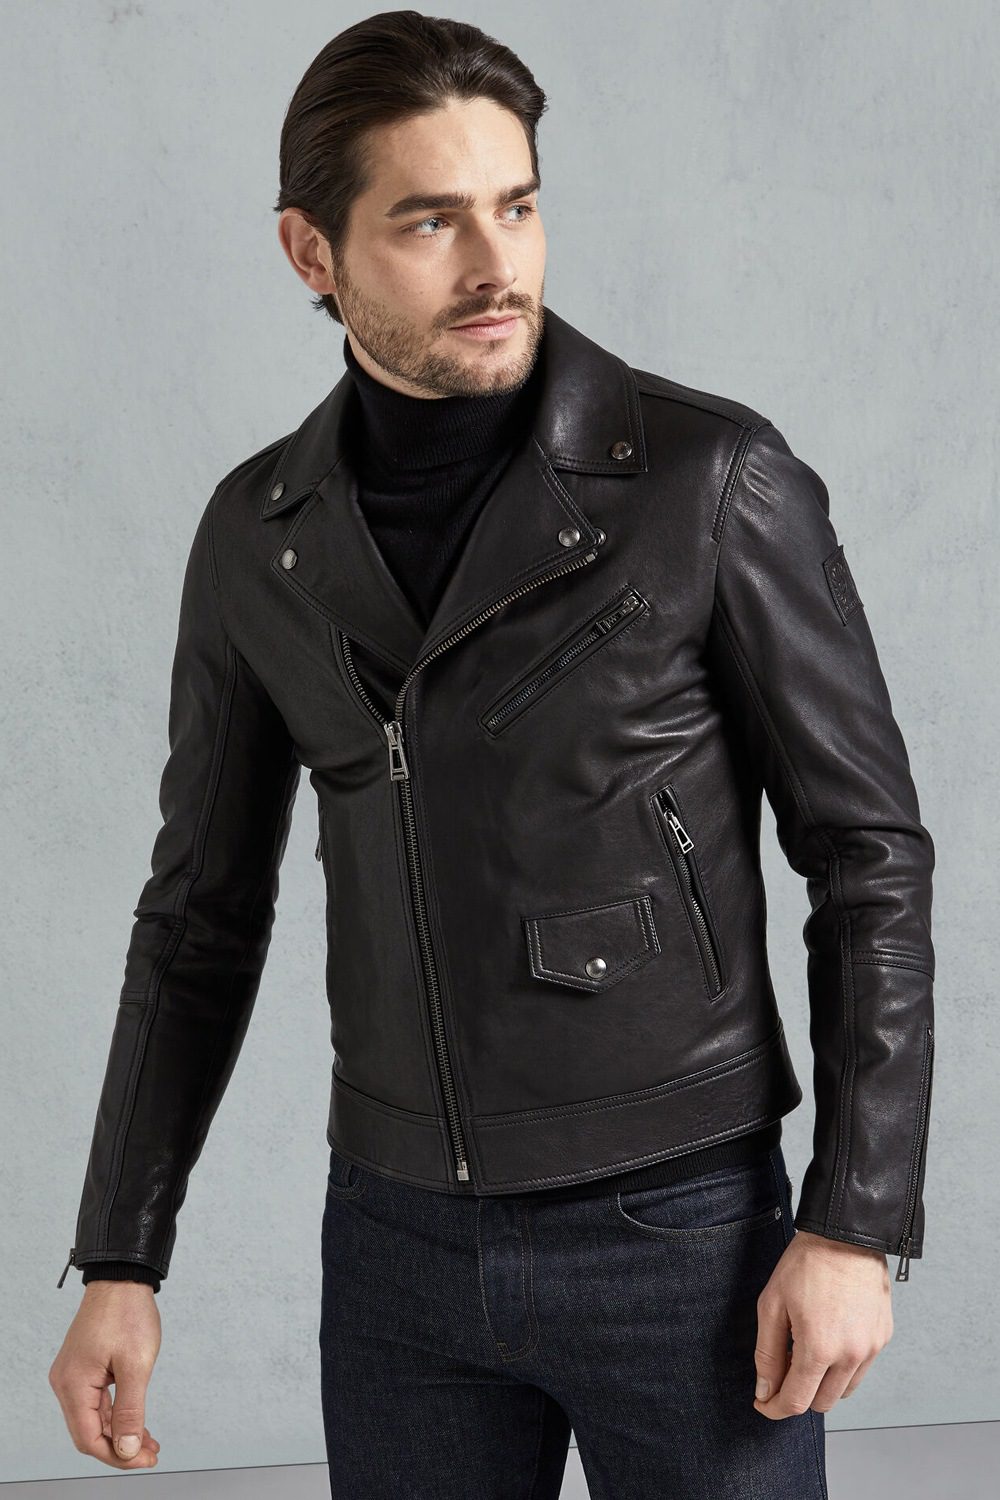 The Best Leather Jacket Brands For Men, Who Makes The Best Quality Leather Jackets